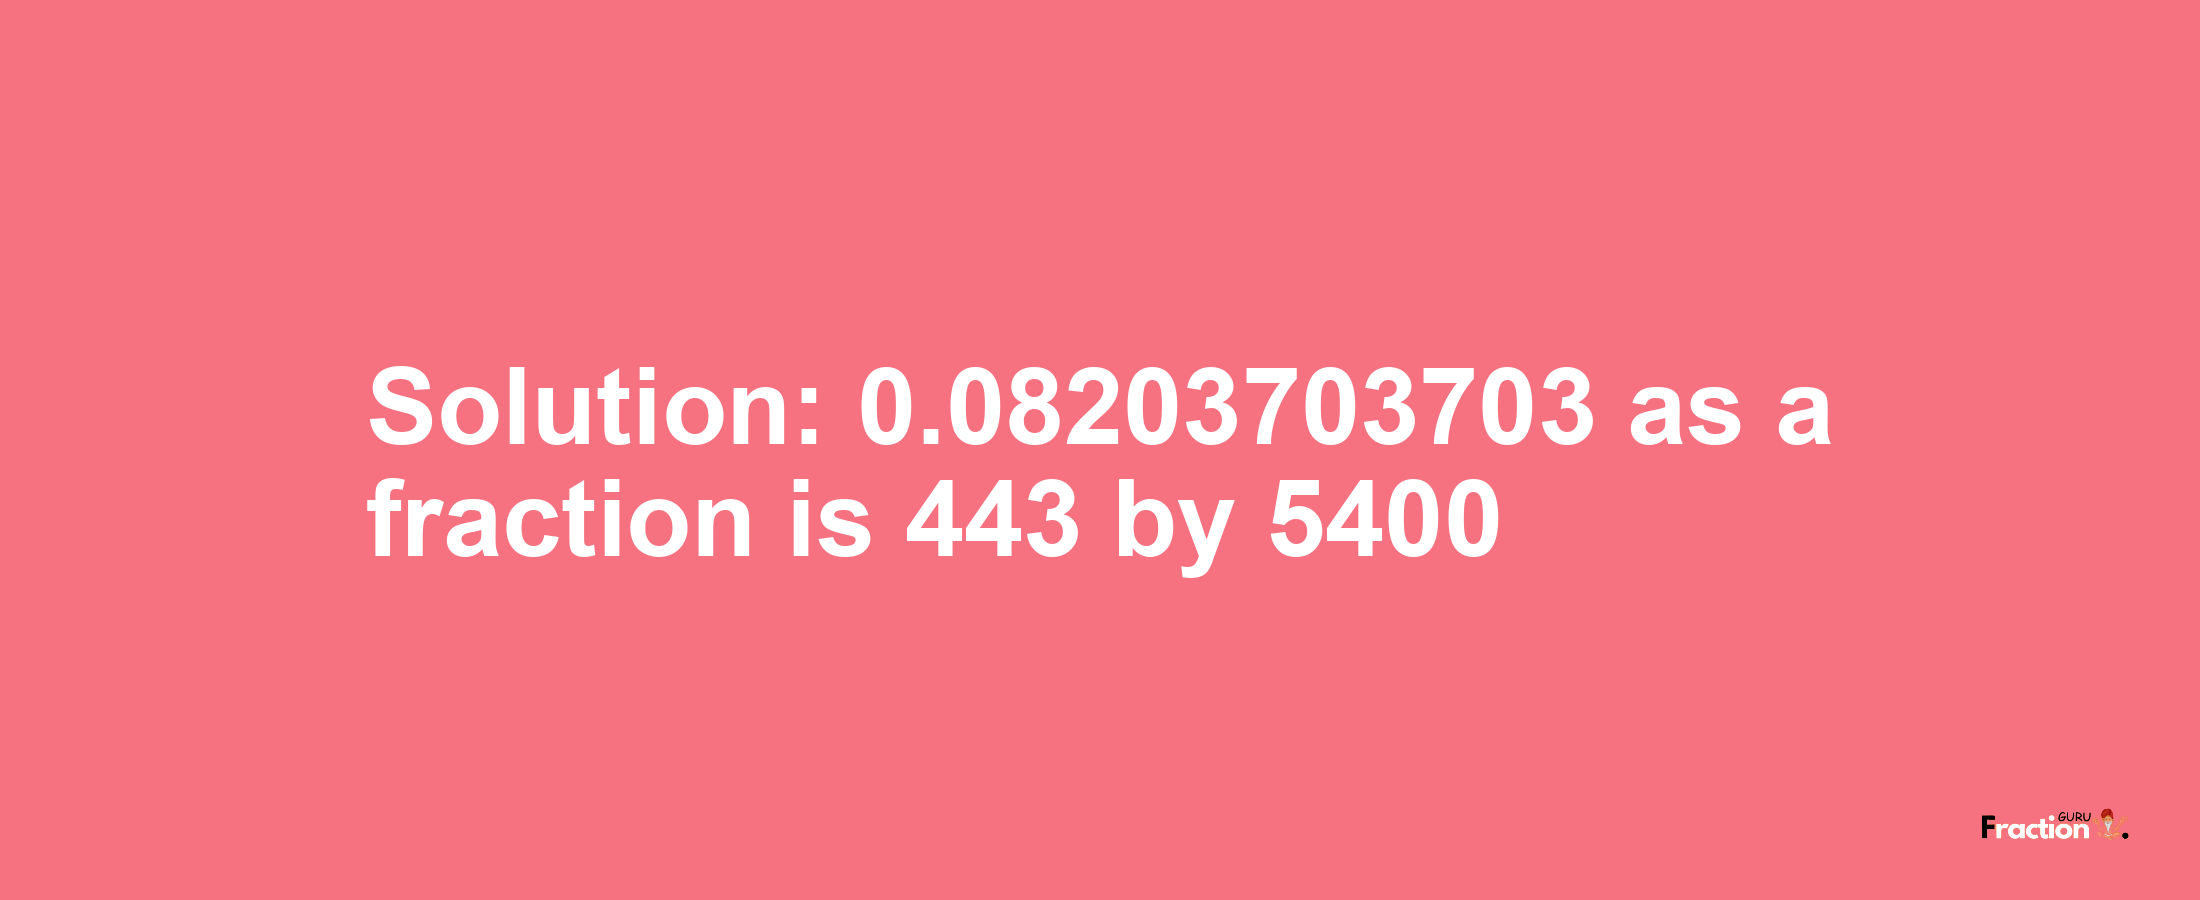 Solution:0.08203703703 as a fraction is 443/5400